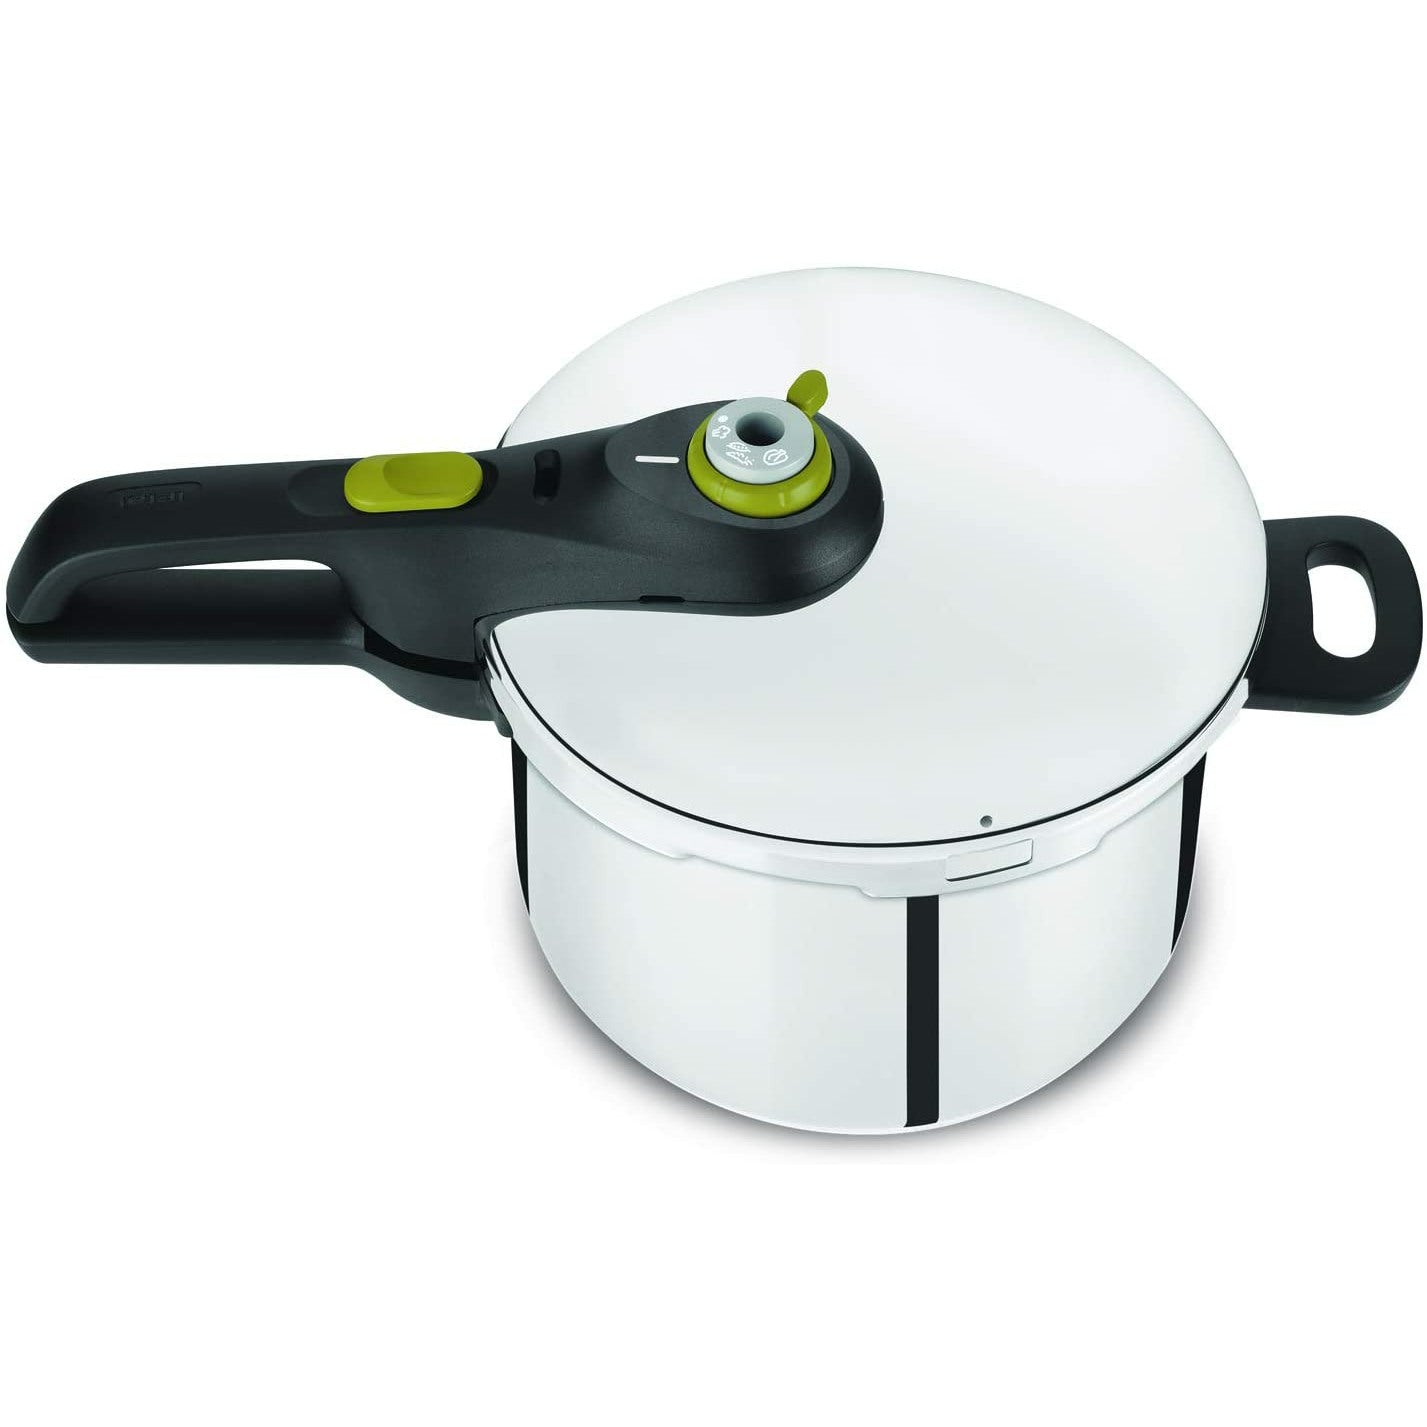 Tefal Secure 5 Neo 6 Litre Pressure Cooker - First Ireland